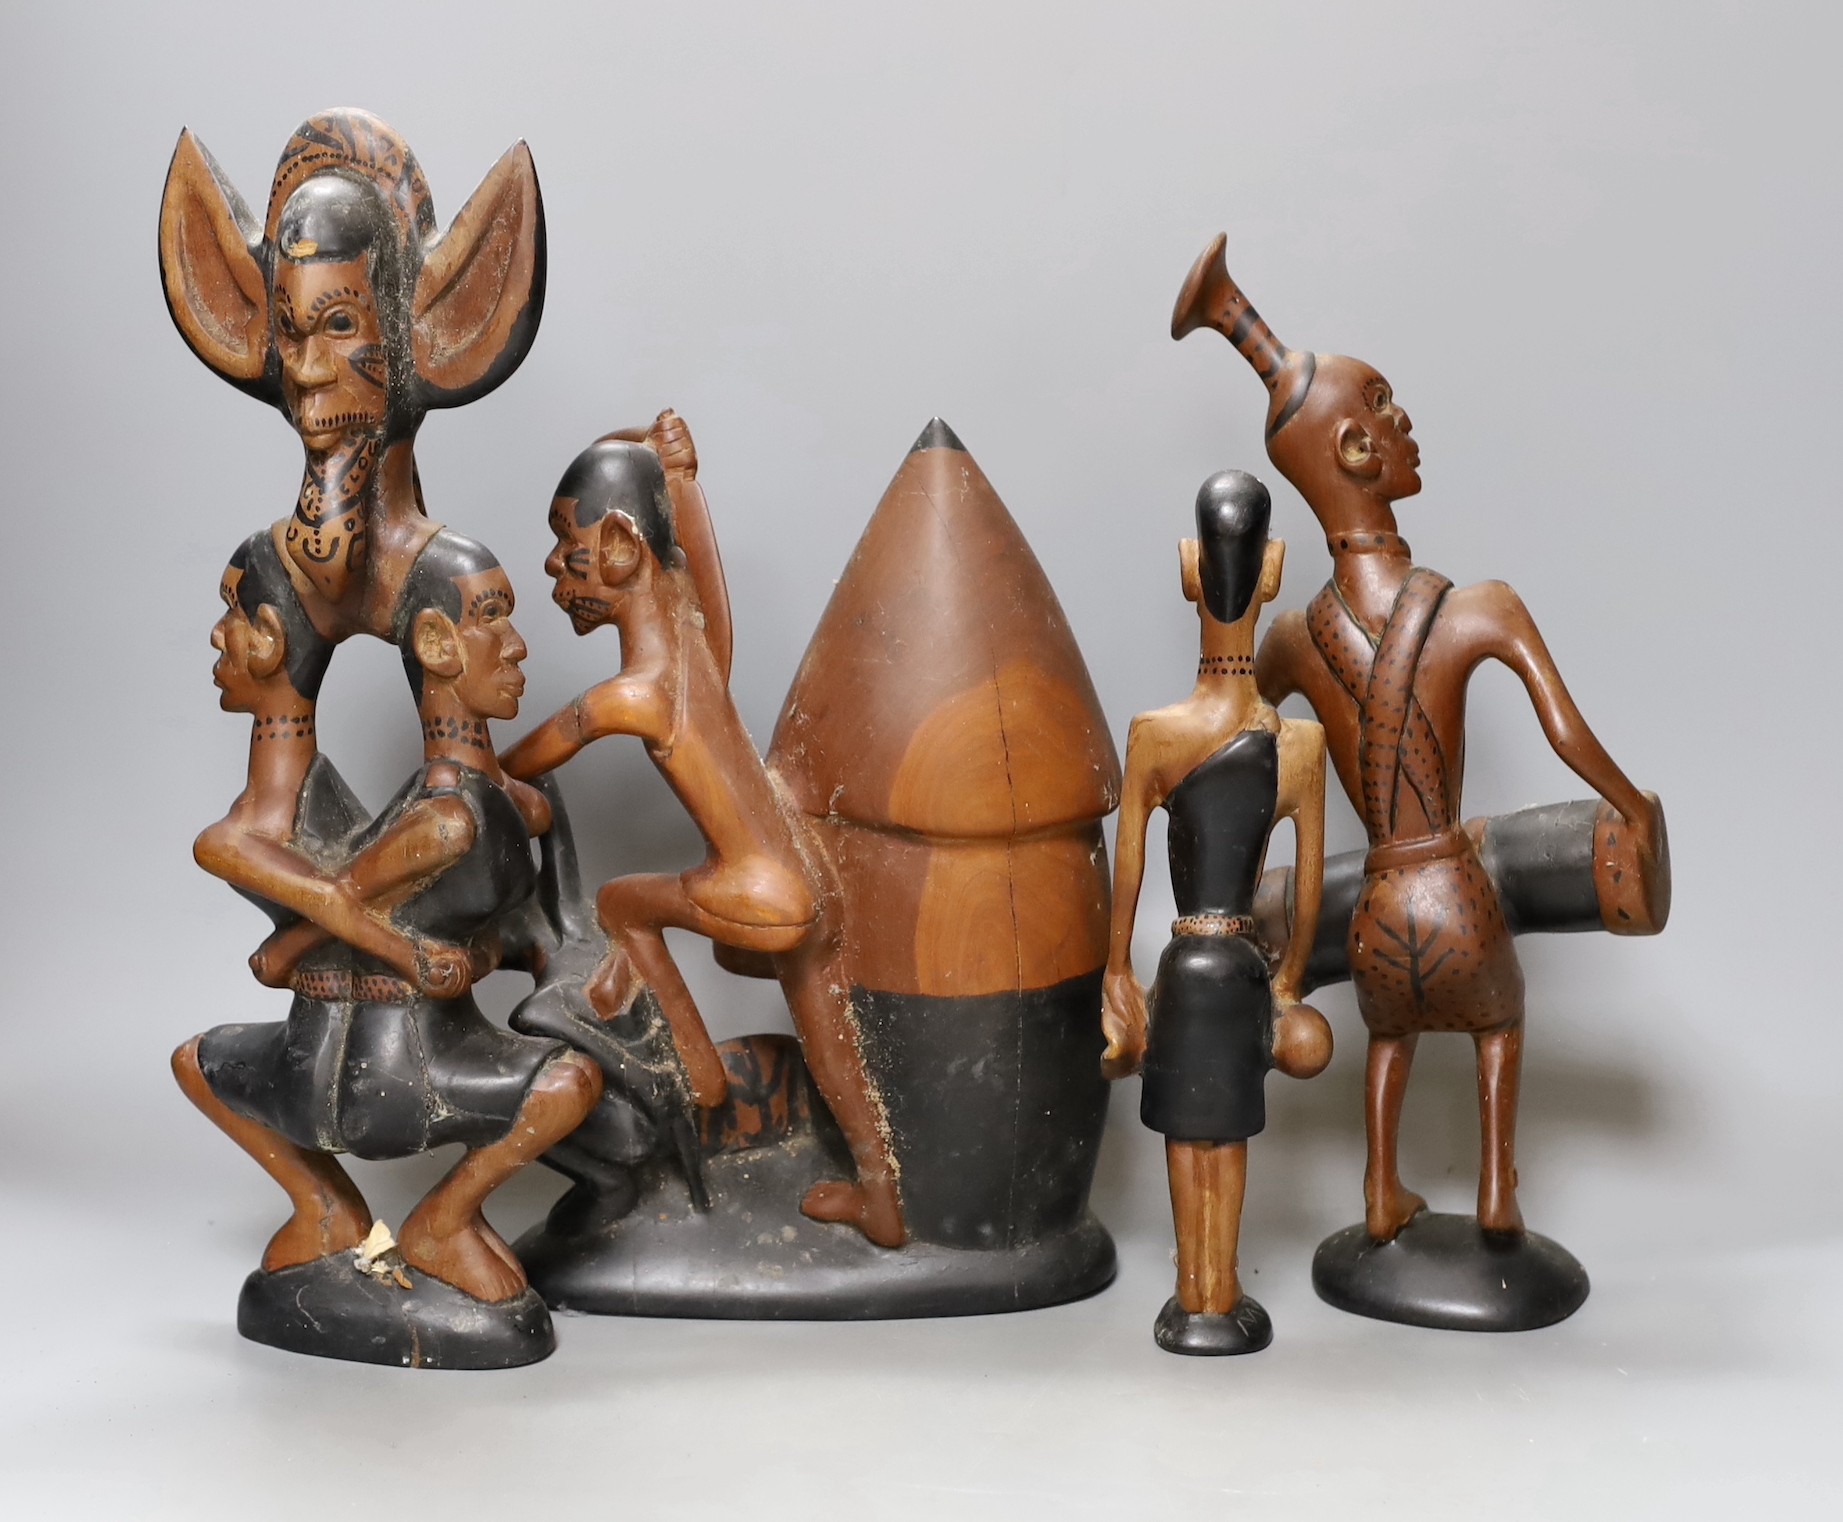 A narrative set of African wooden carvings, 35cm